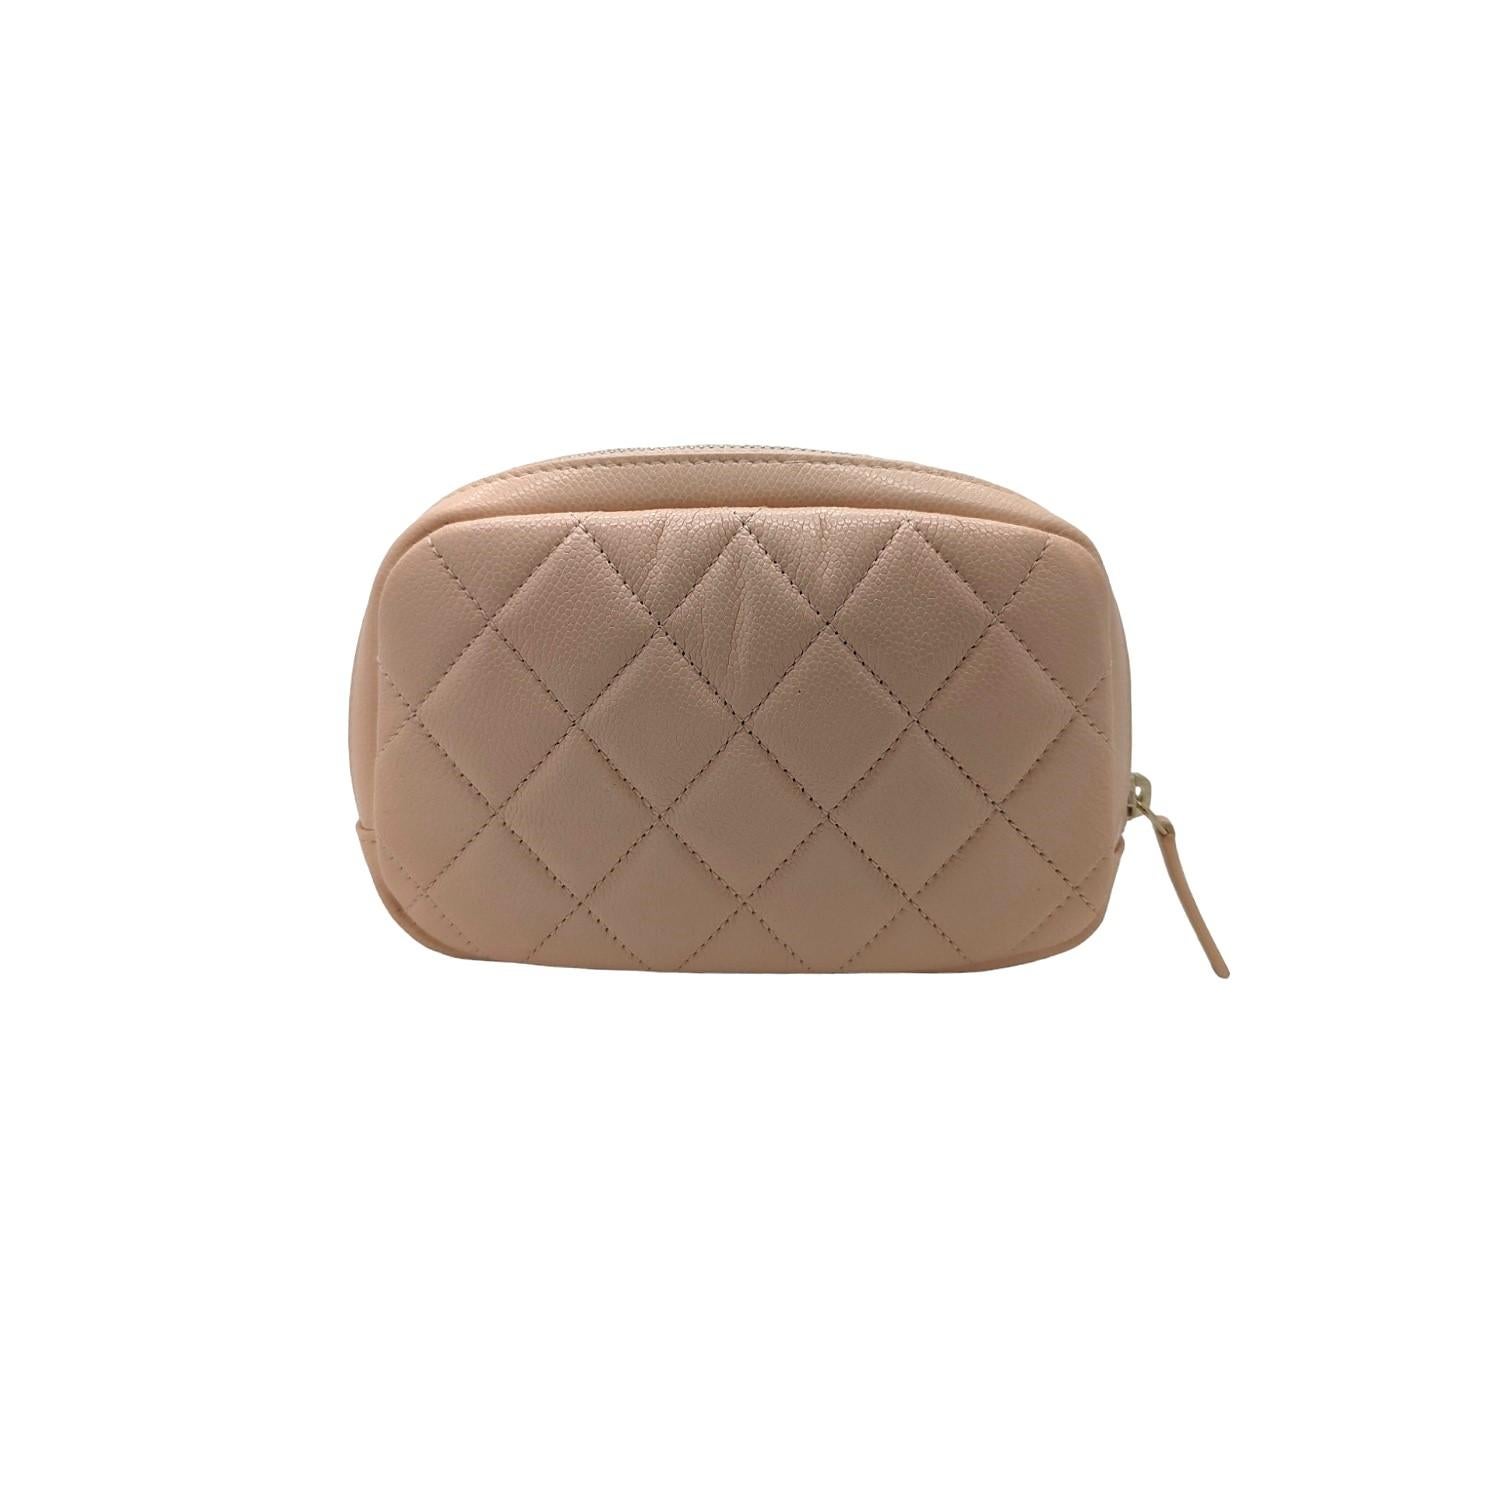 From the 2021-2022 Collection by Virginie Viard; Chanel Caviar Quilted Small Curvy Pouch Cosmetic Case. This small sized cosmetics case is crafted of caviar quilted leather in light beige (with a peach undertone). Featuring a polished gold Chanel CC